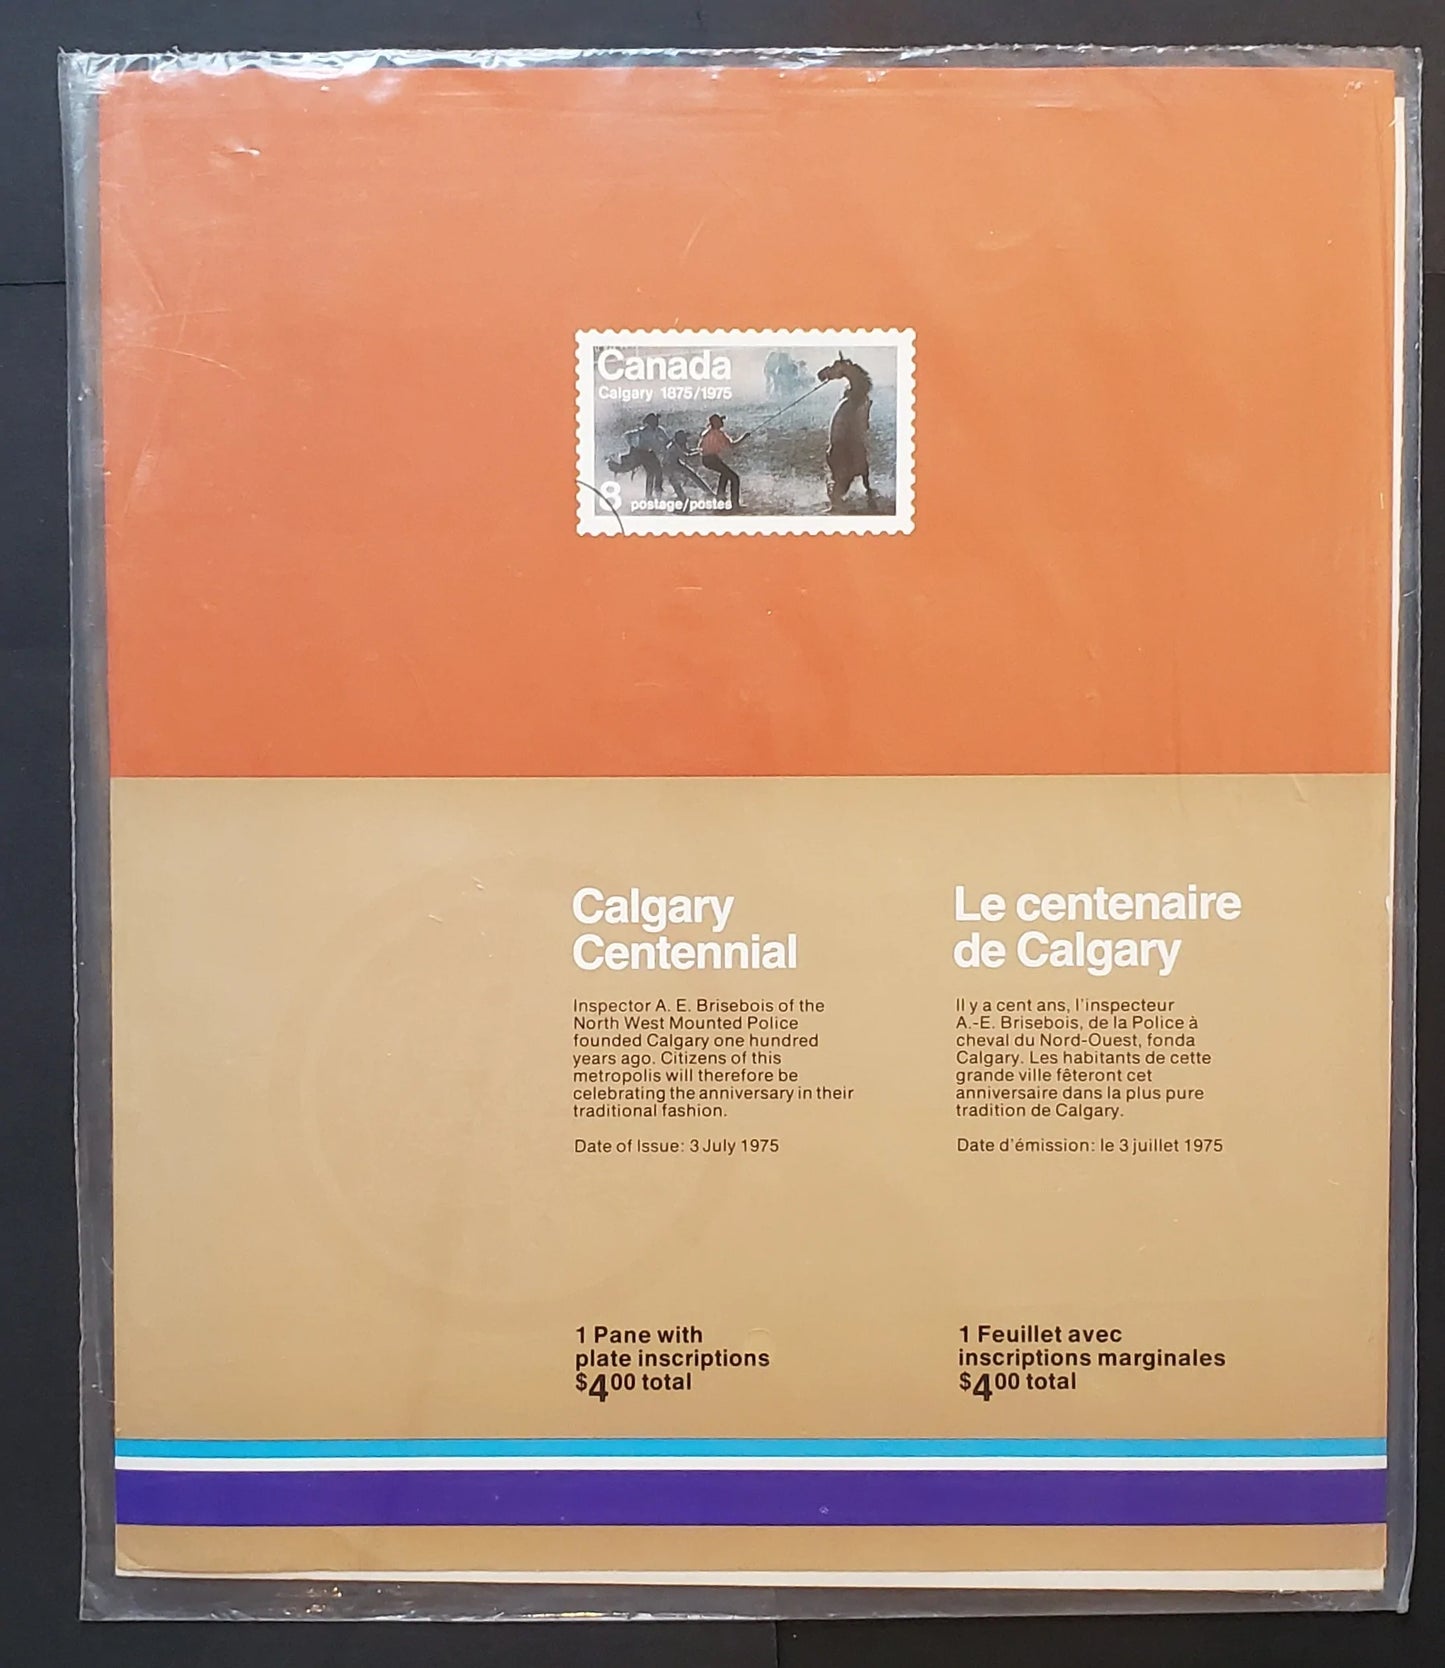 Lot 89 Canada #667, i-ii 8c  Multicoloured Calgary Stampede, 1975 Calgary Centennial Issue, Philatelic Stock Sheet Of 50, HF/HB Smooth Paper, VF-80 NH, Unfolded,  Unitrade Cat. As Singles $40.5, Sealed In Pack With Type 2 Insert, Includes Both Varieties